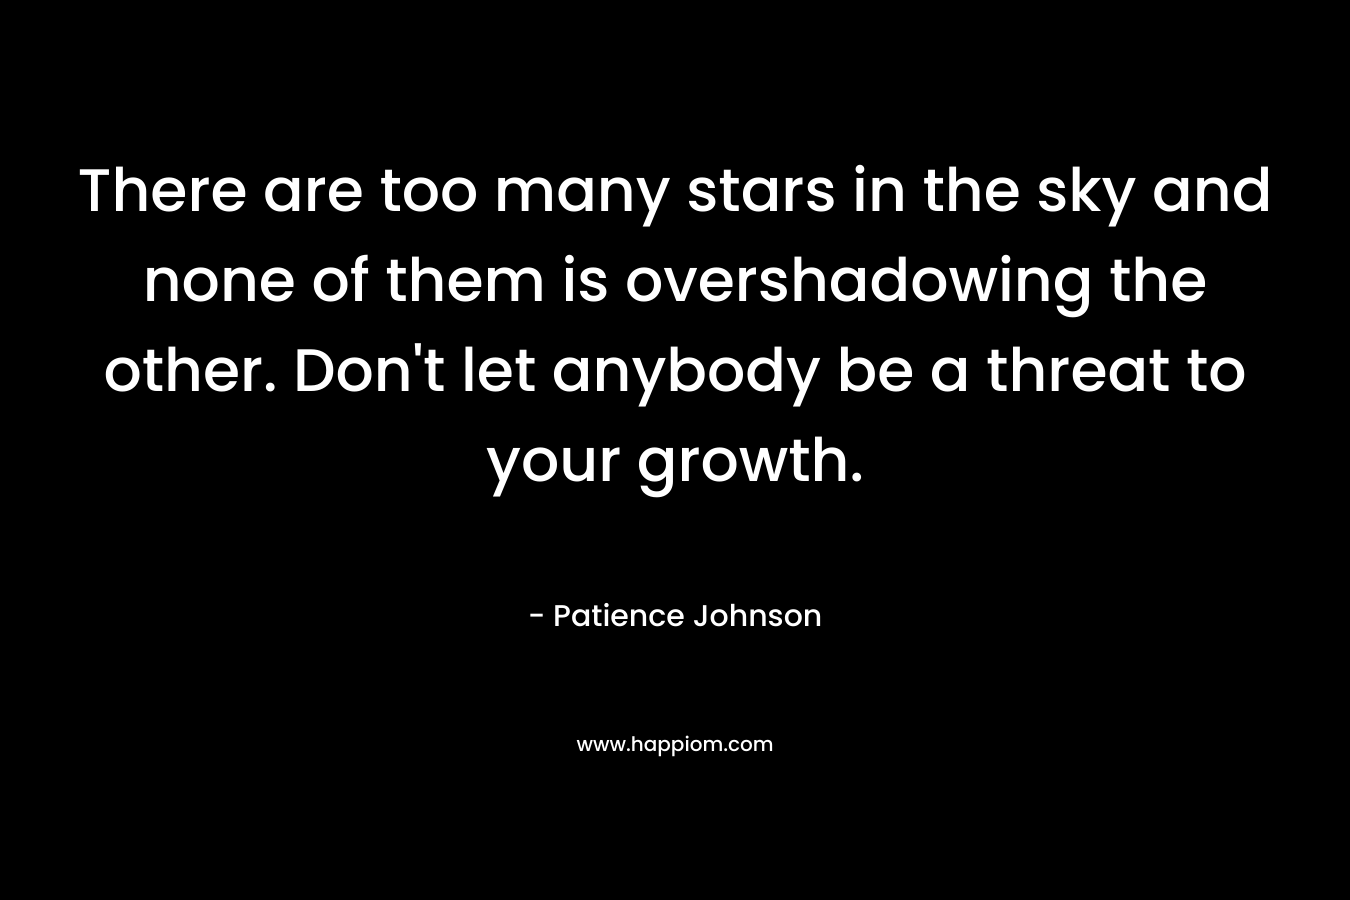 There are too many stars in the sky and none of them is overshadowing the other. Don't let anybody be a threat to your growth.